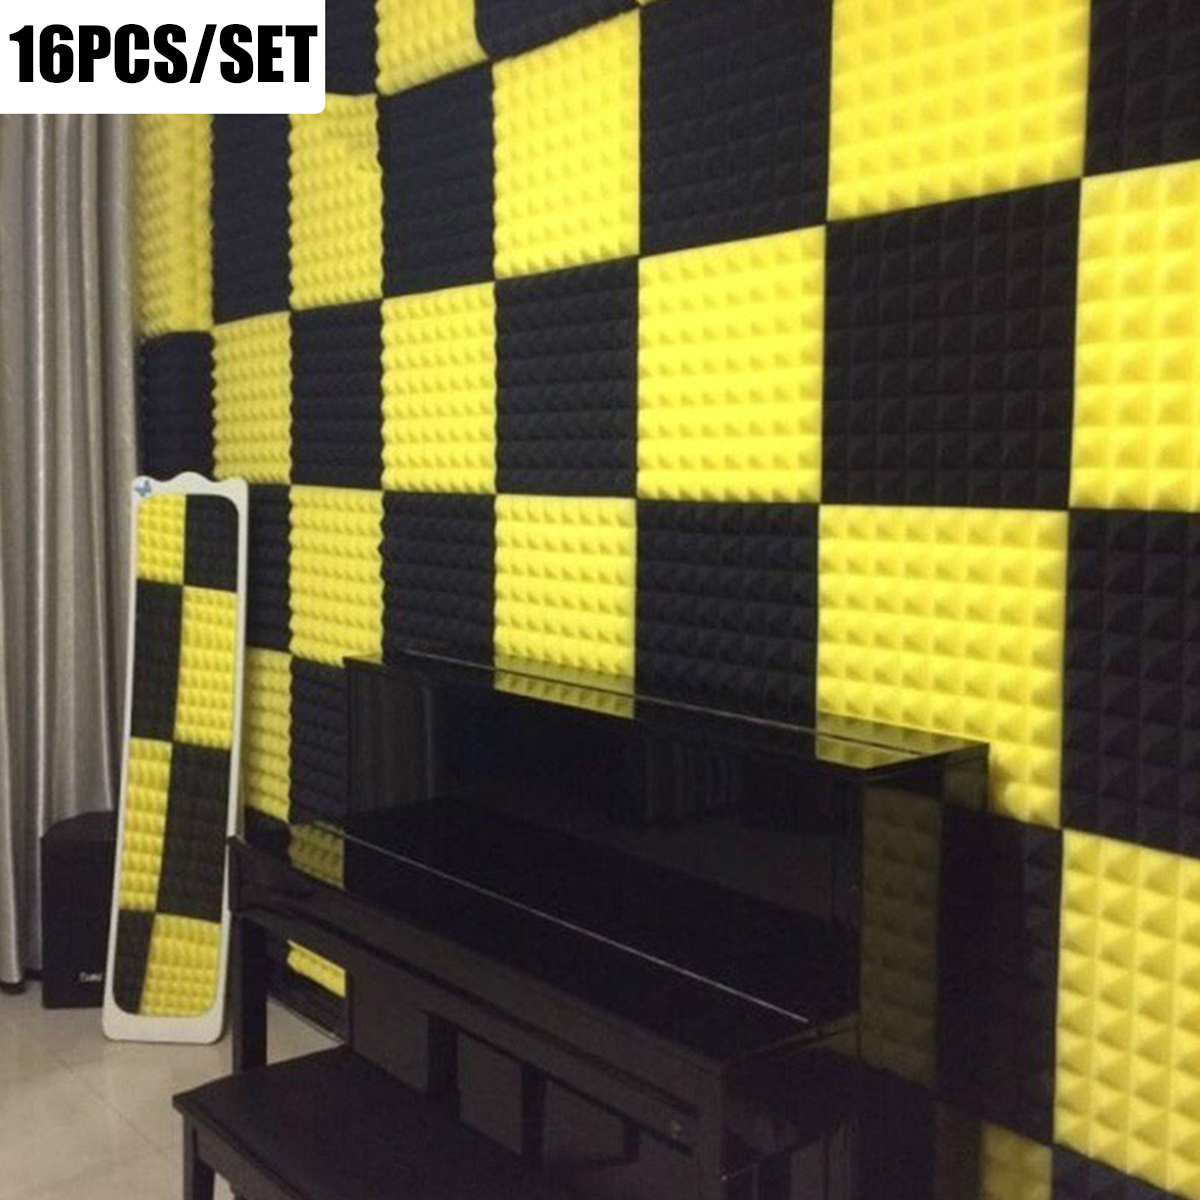 16 Pcs Soundproofing Wedges Acoustic Panels Tiles Insulation Closed Cell Foams